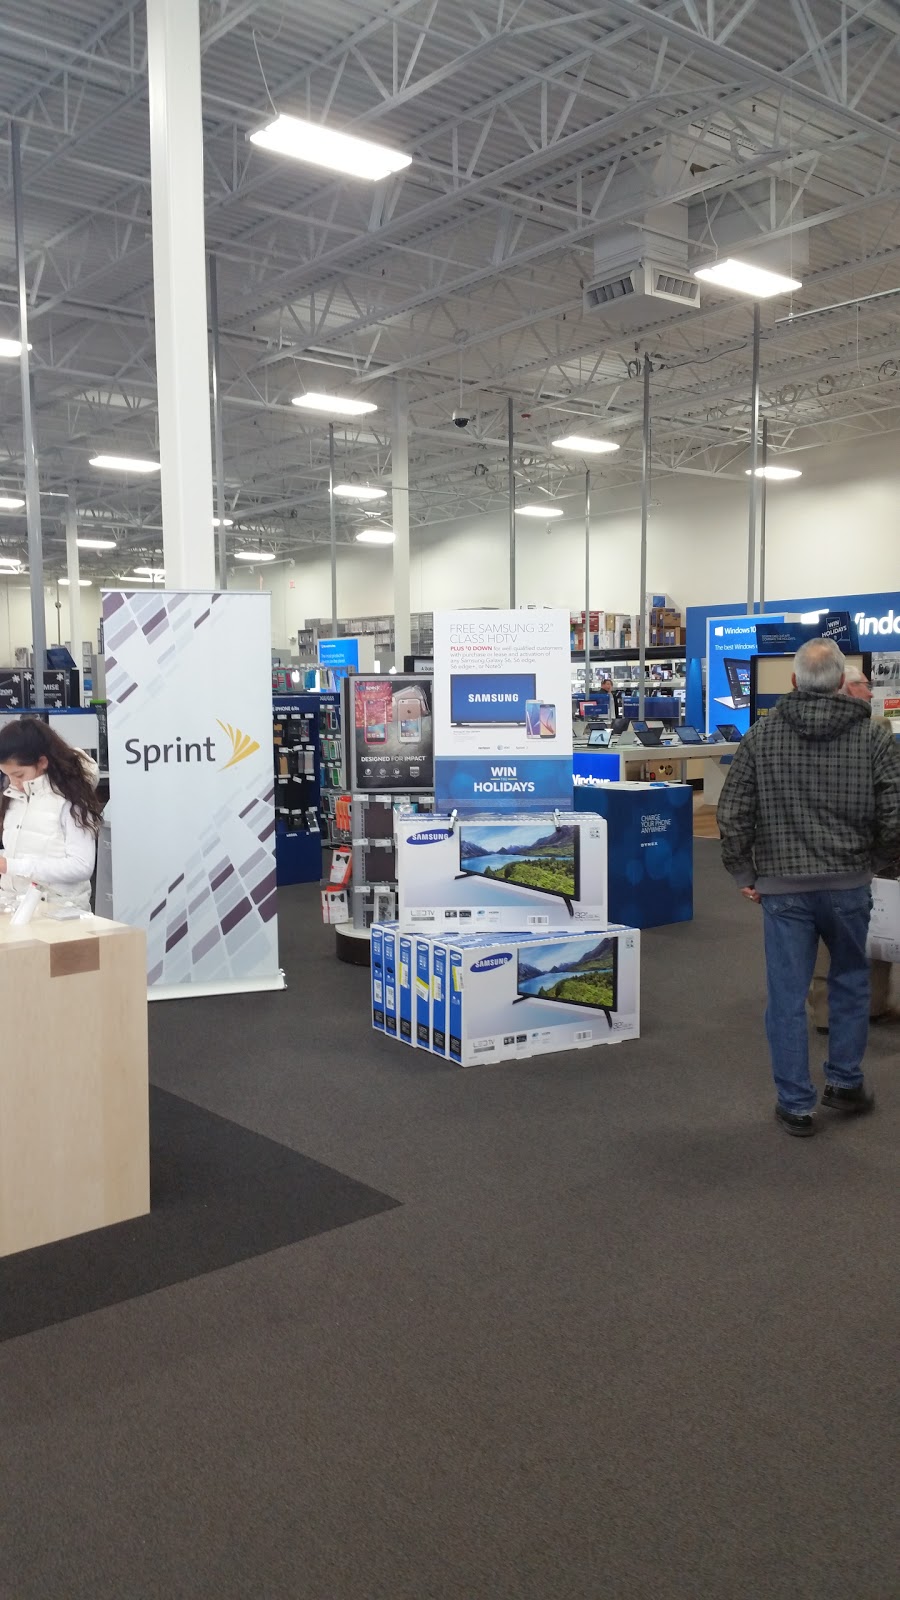 Best Buy | 400 Front Street Ste 4, Collegeville, PA 19426, USA | Phone: (610) 409-7879